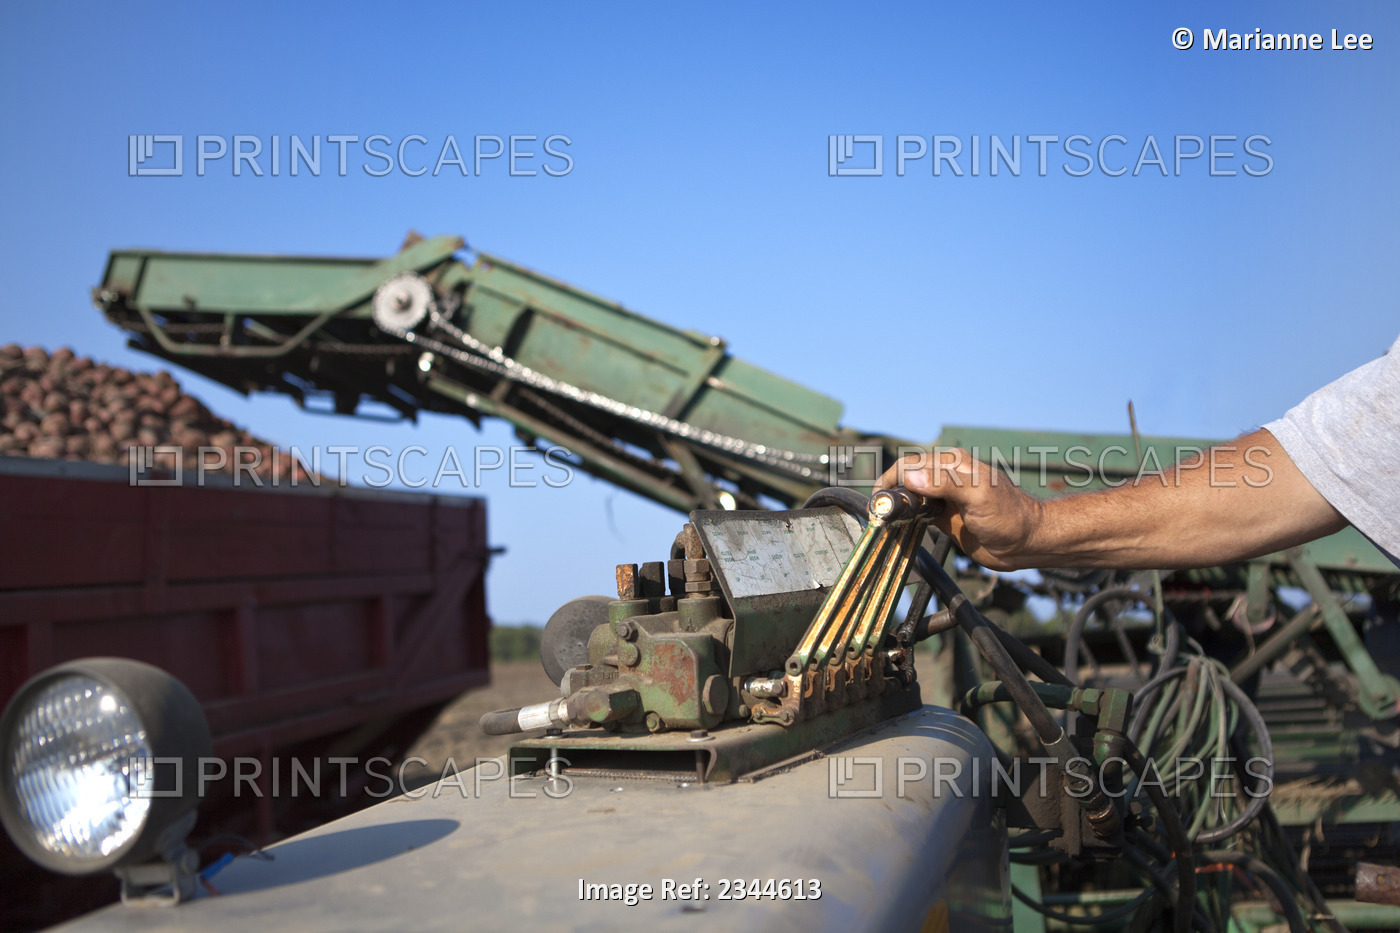 Agriculture - A farmers hand operates levers on the harvester during potato ...